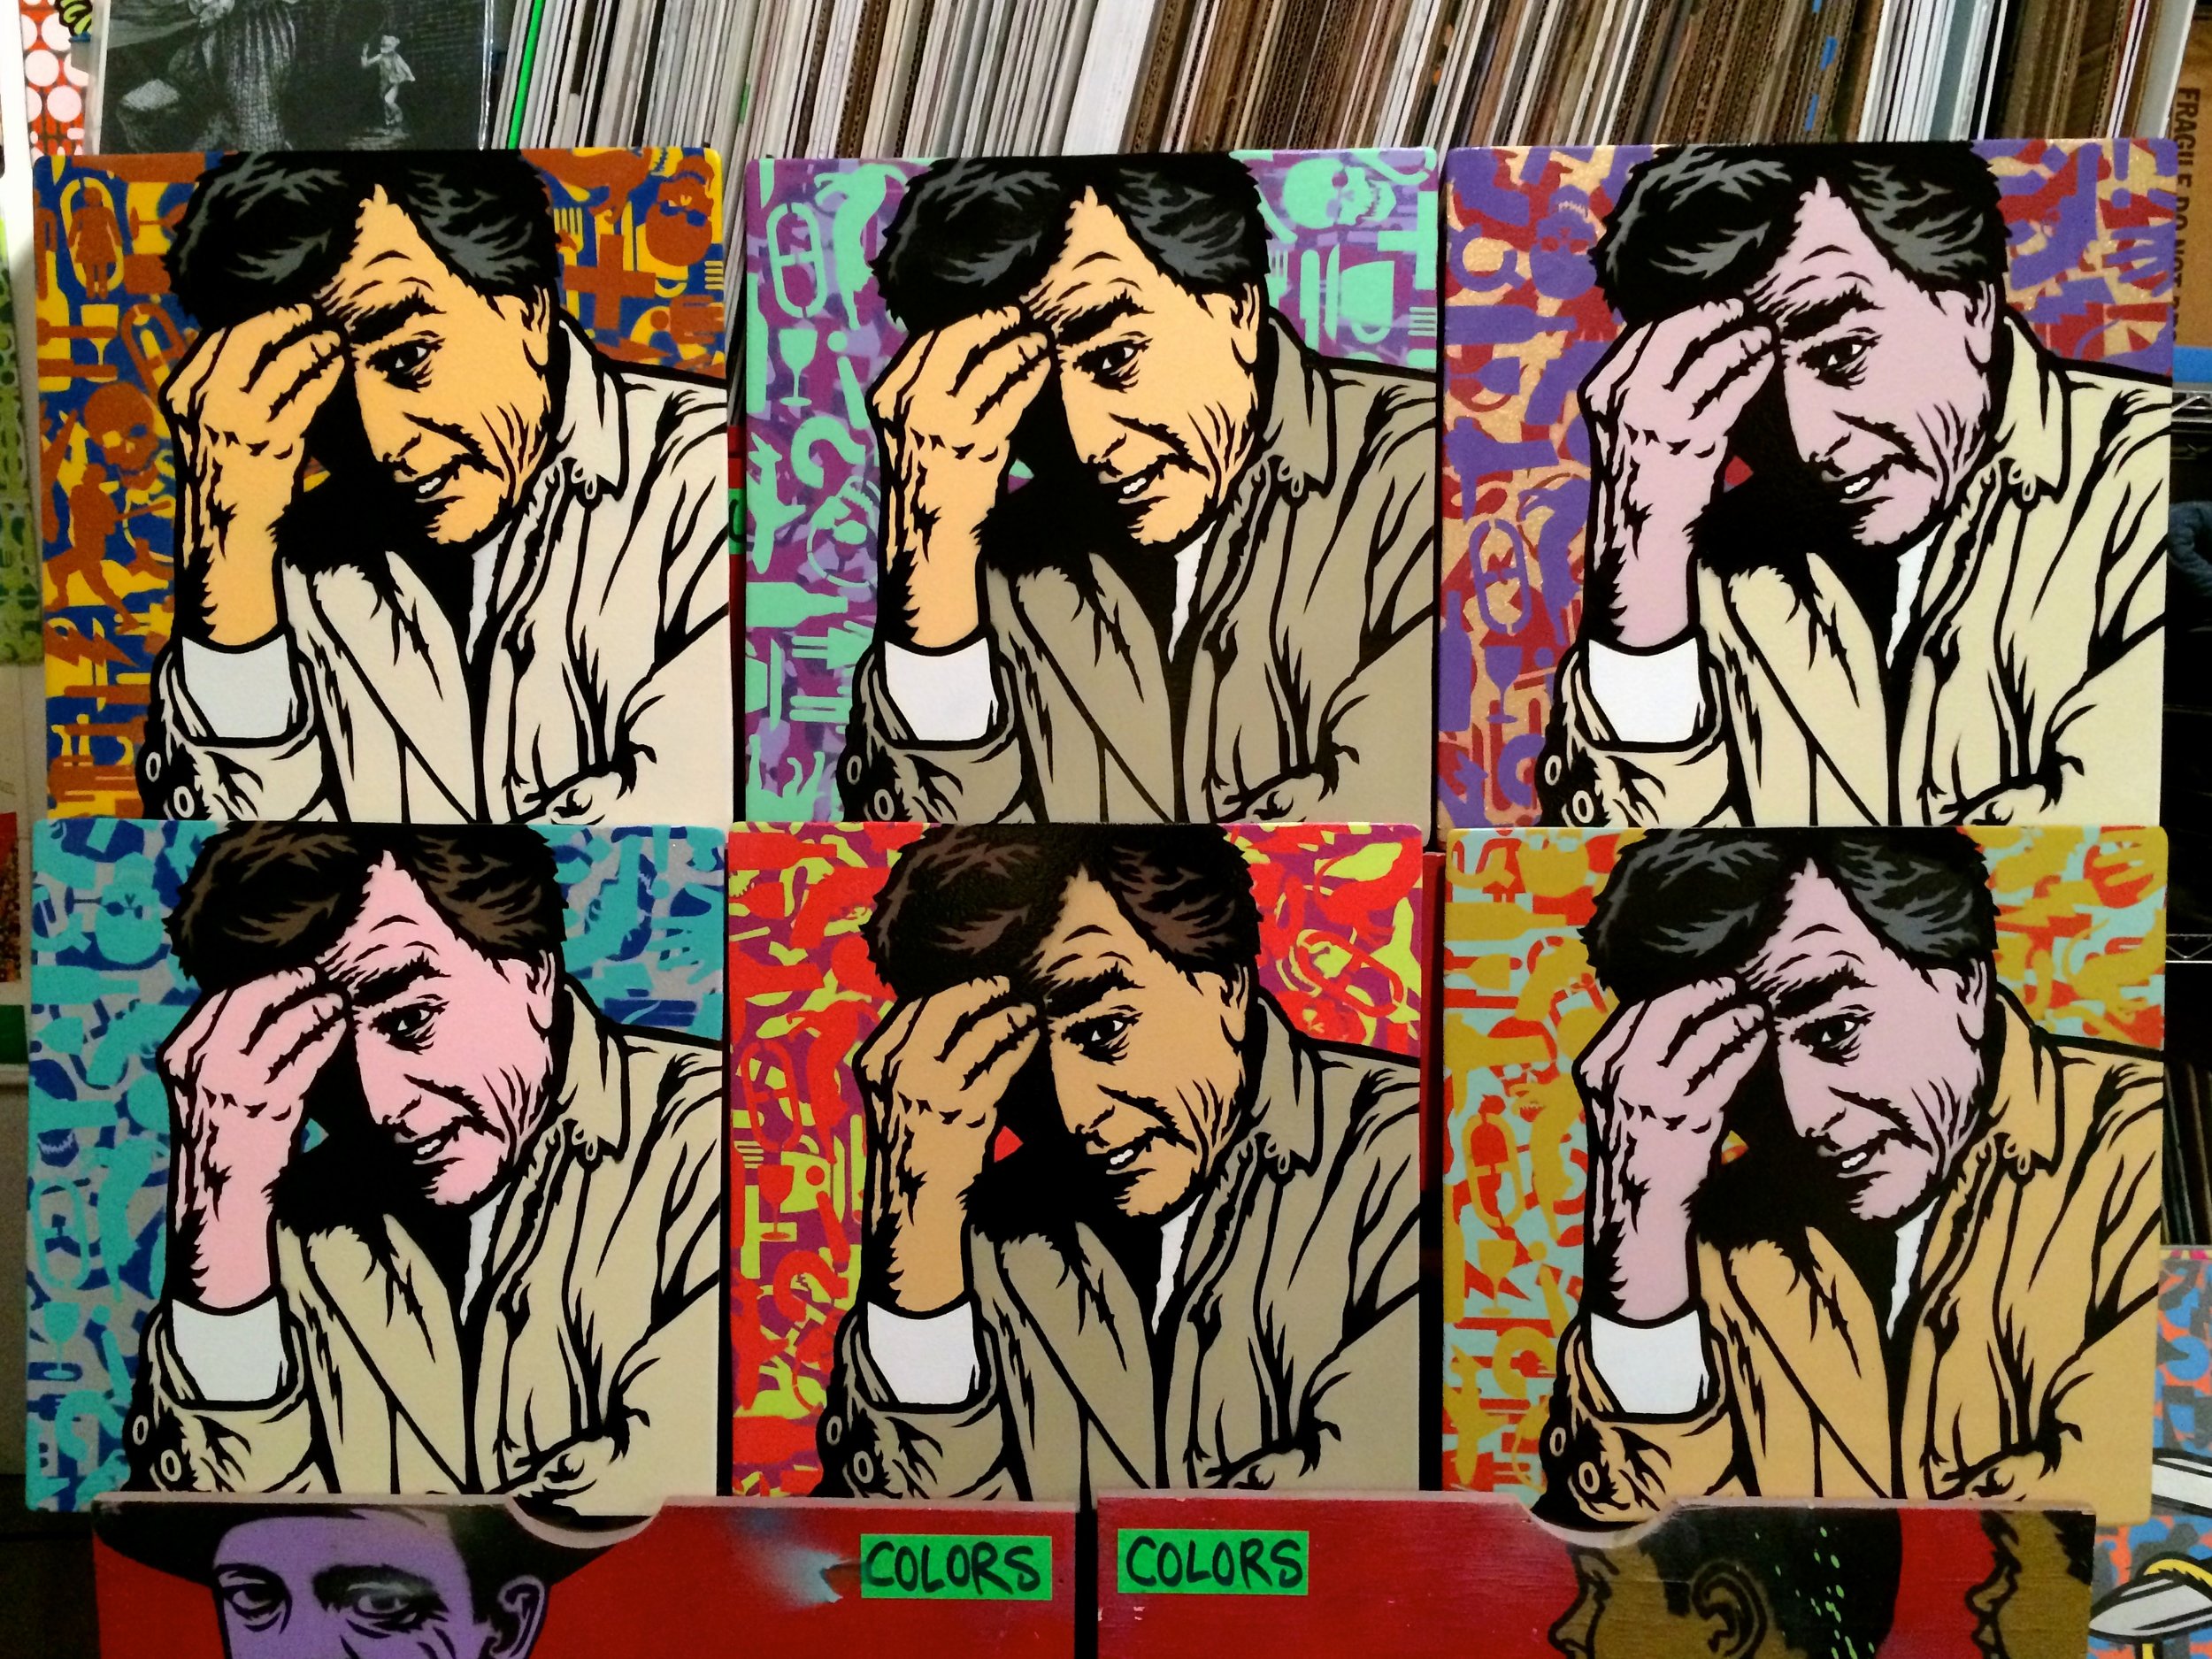 "One More Thing" (Columbo) Spray paint/stencil on wood panel, 20"x20" Edition of 6